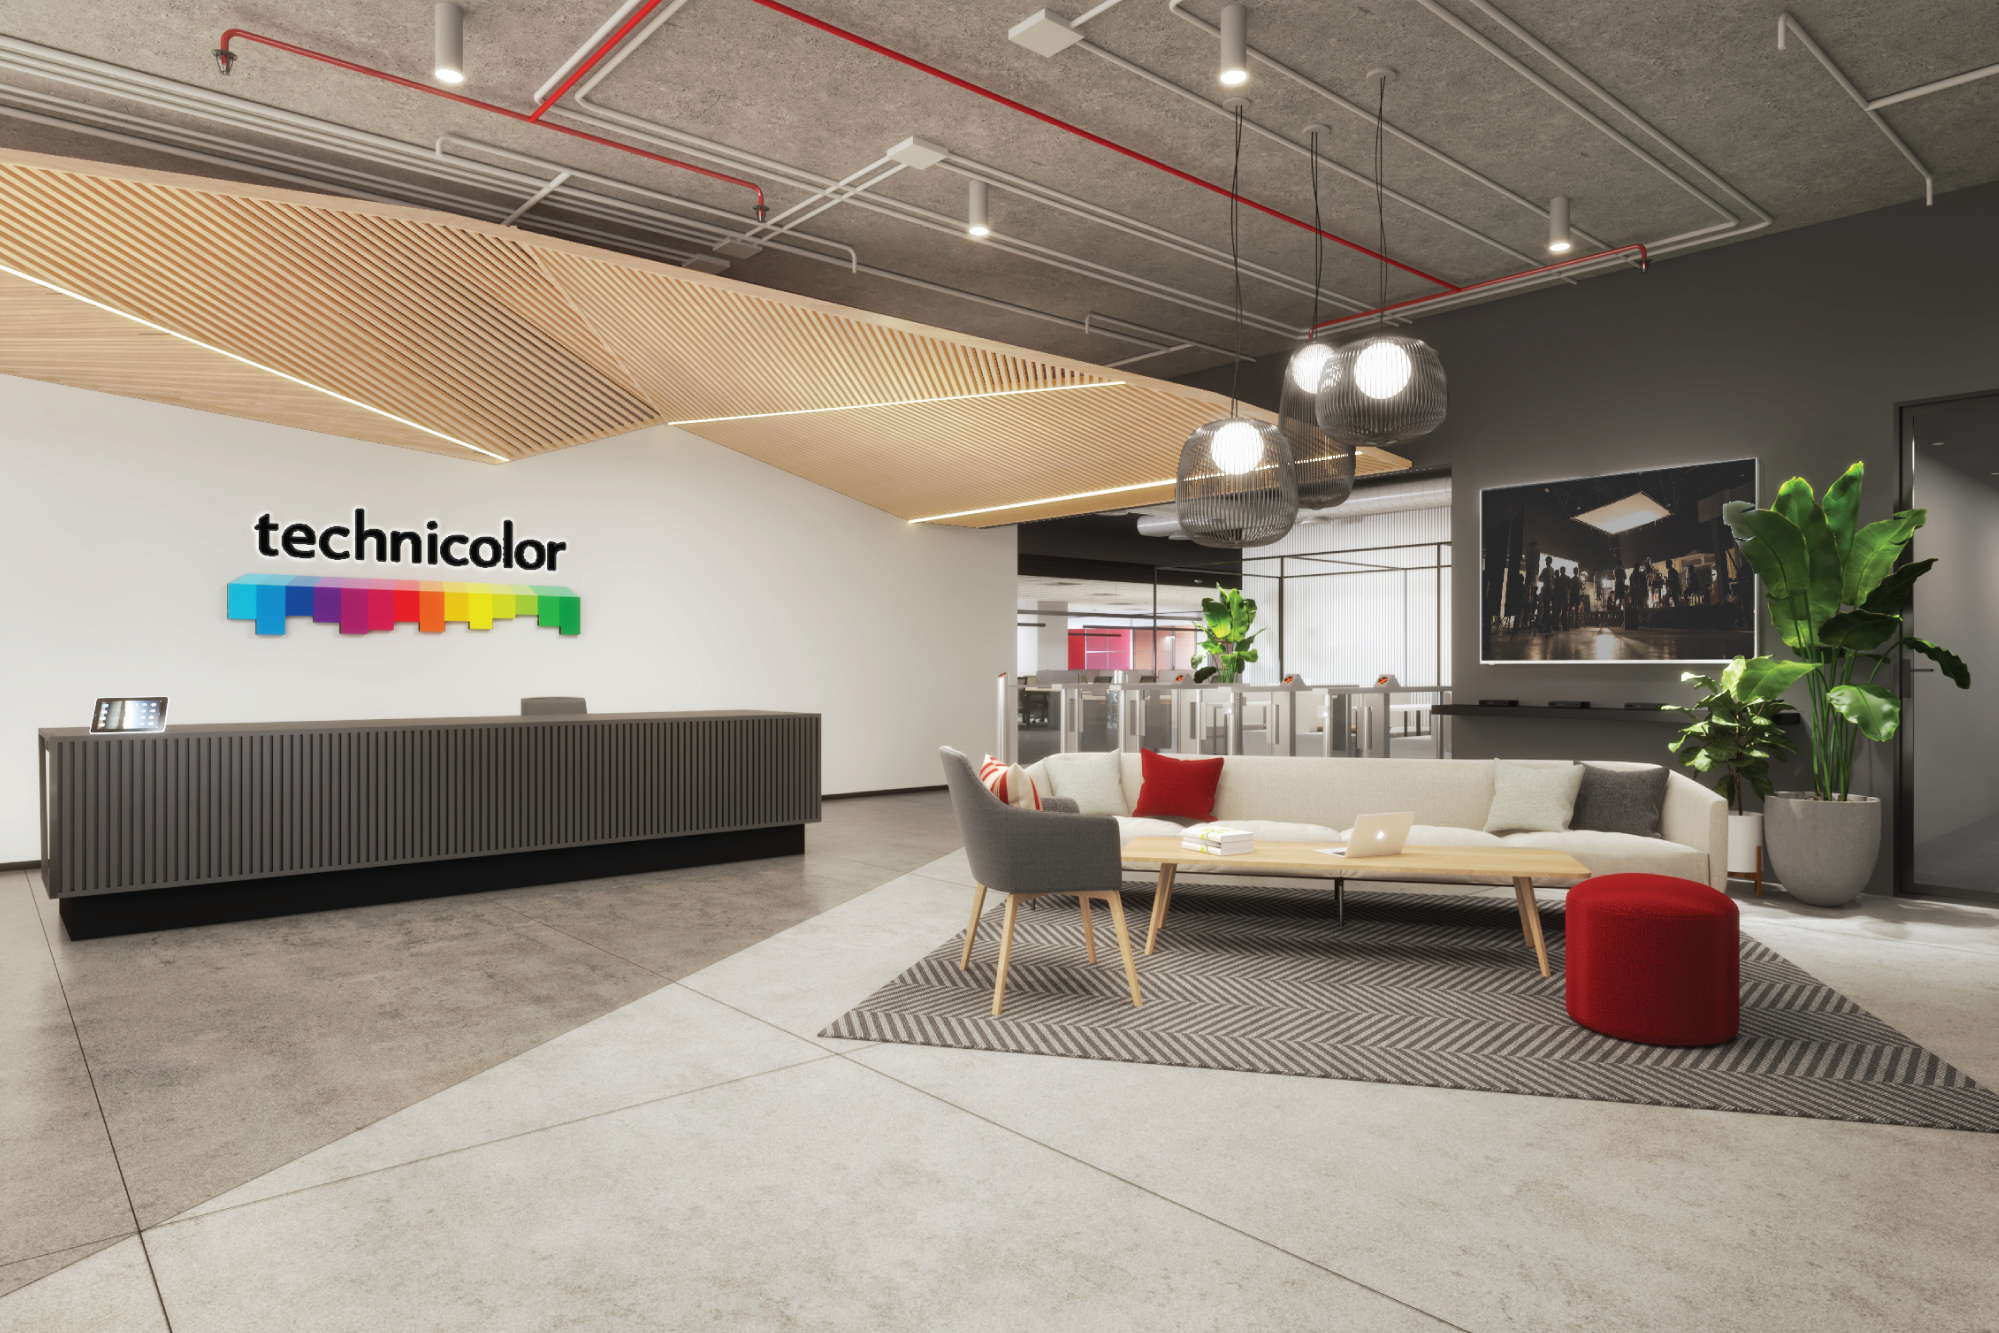 Technicolor’s office interior in Chennai - Workplace design for prioritizing employee comfort and well-being